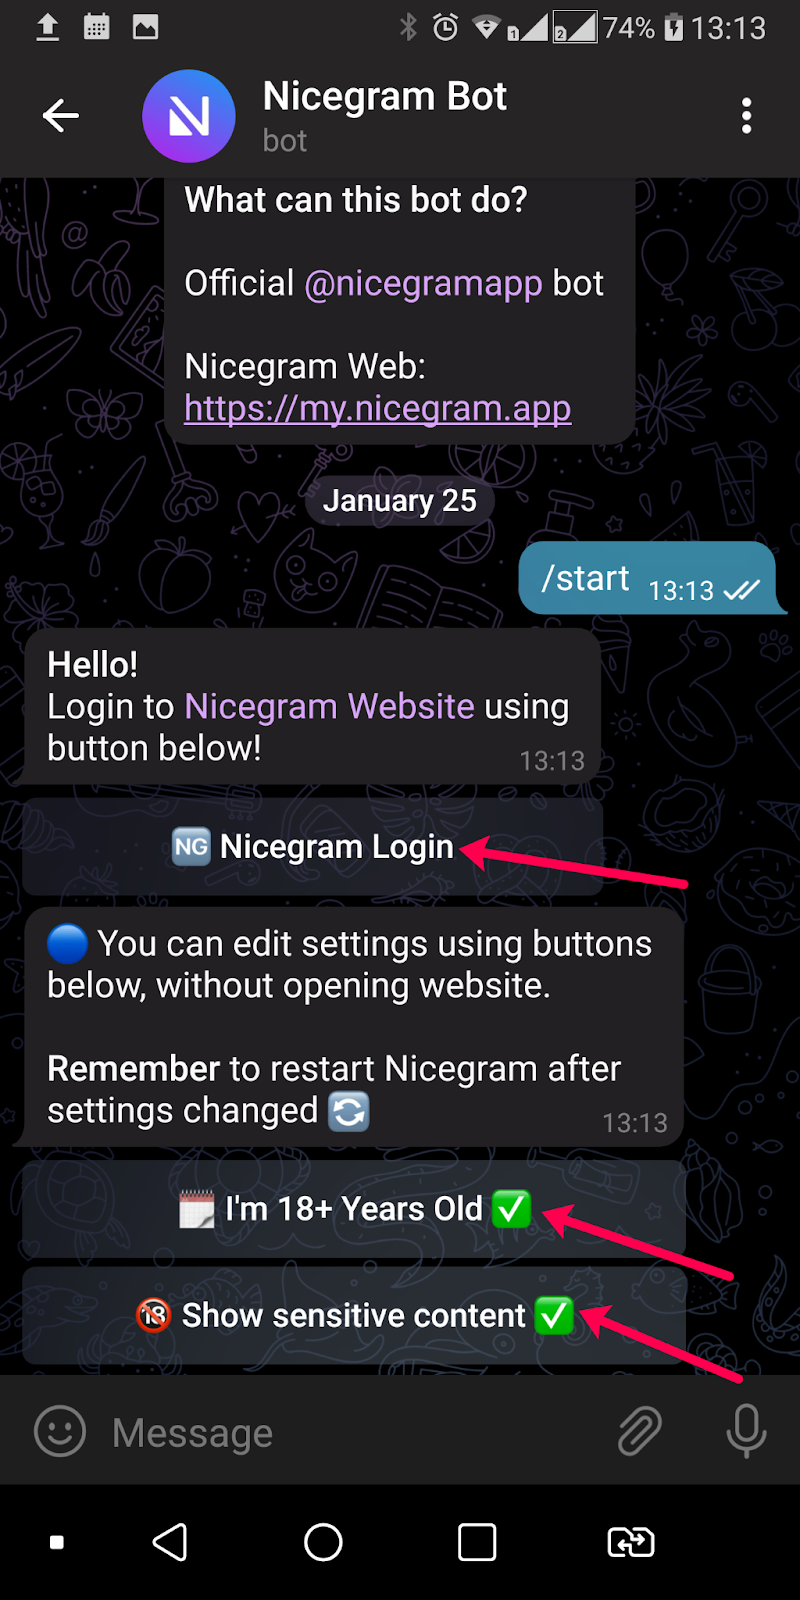 login to Nicegram and select show sensitive content alongside with the age
